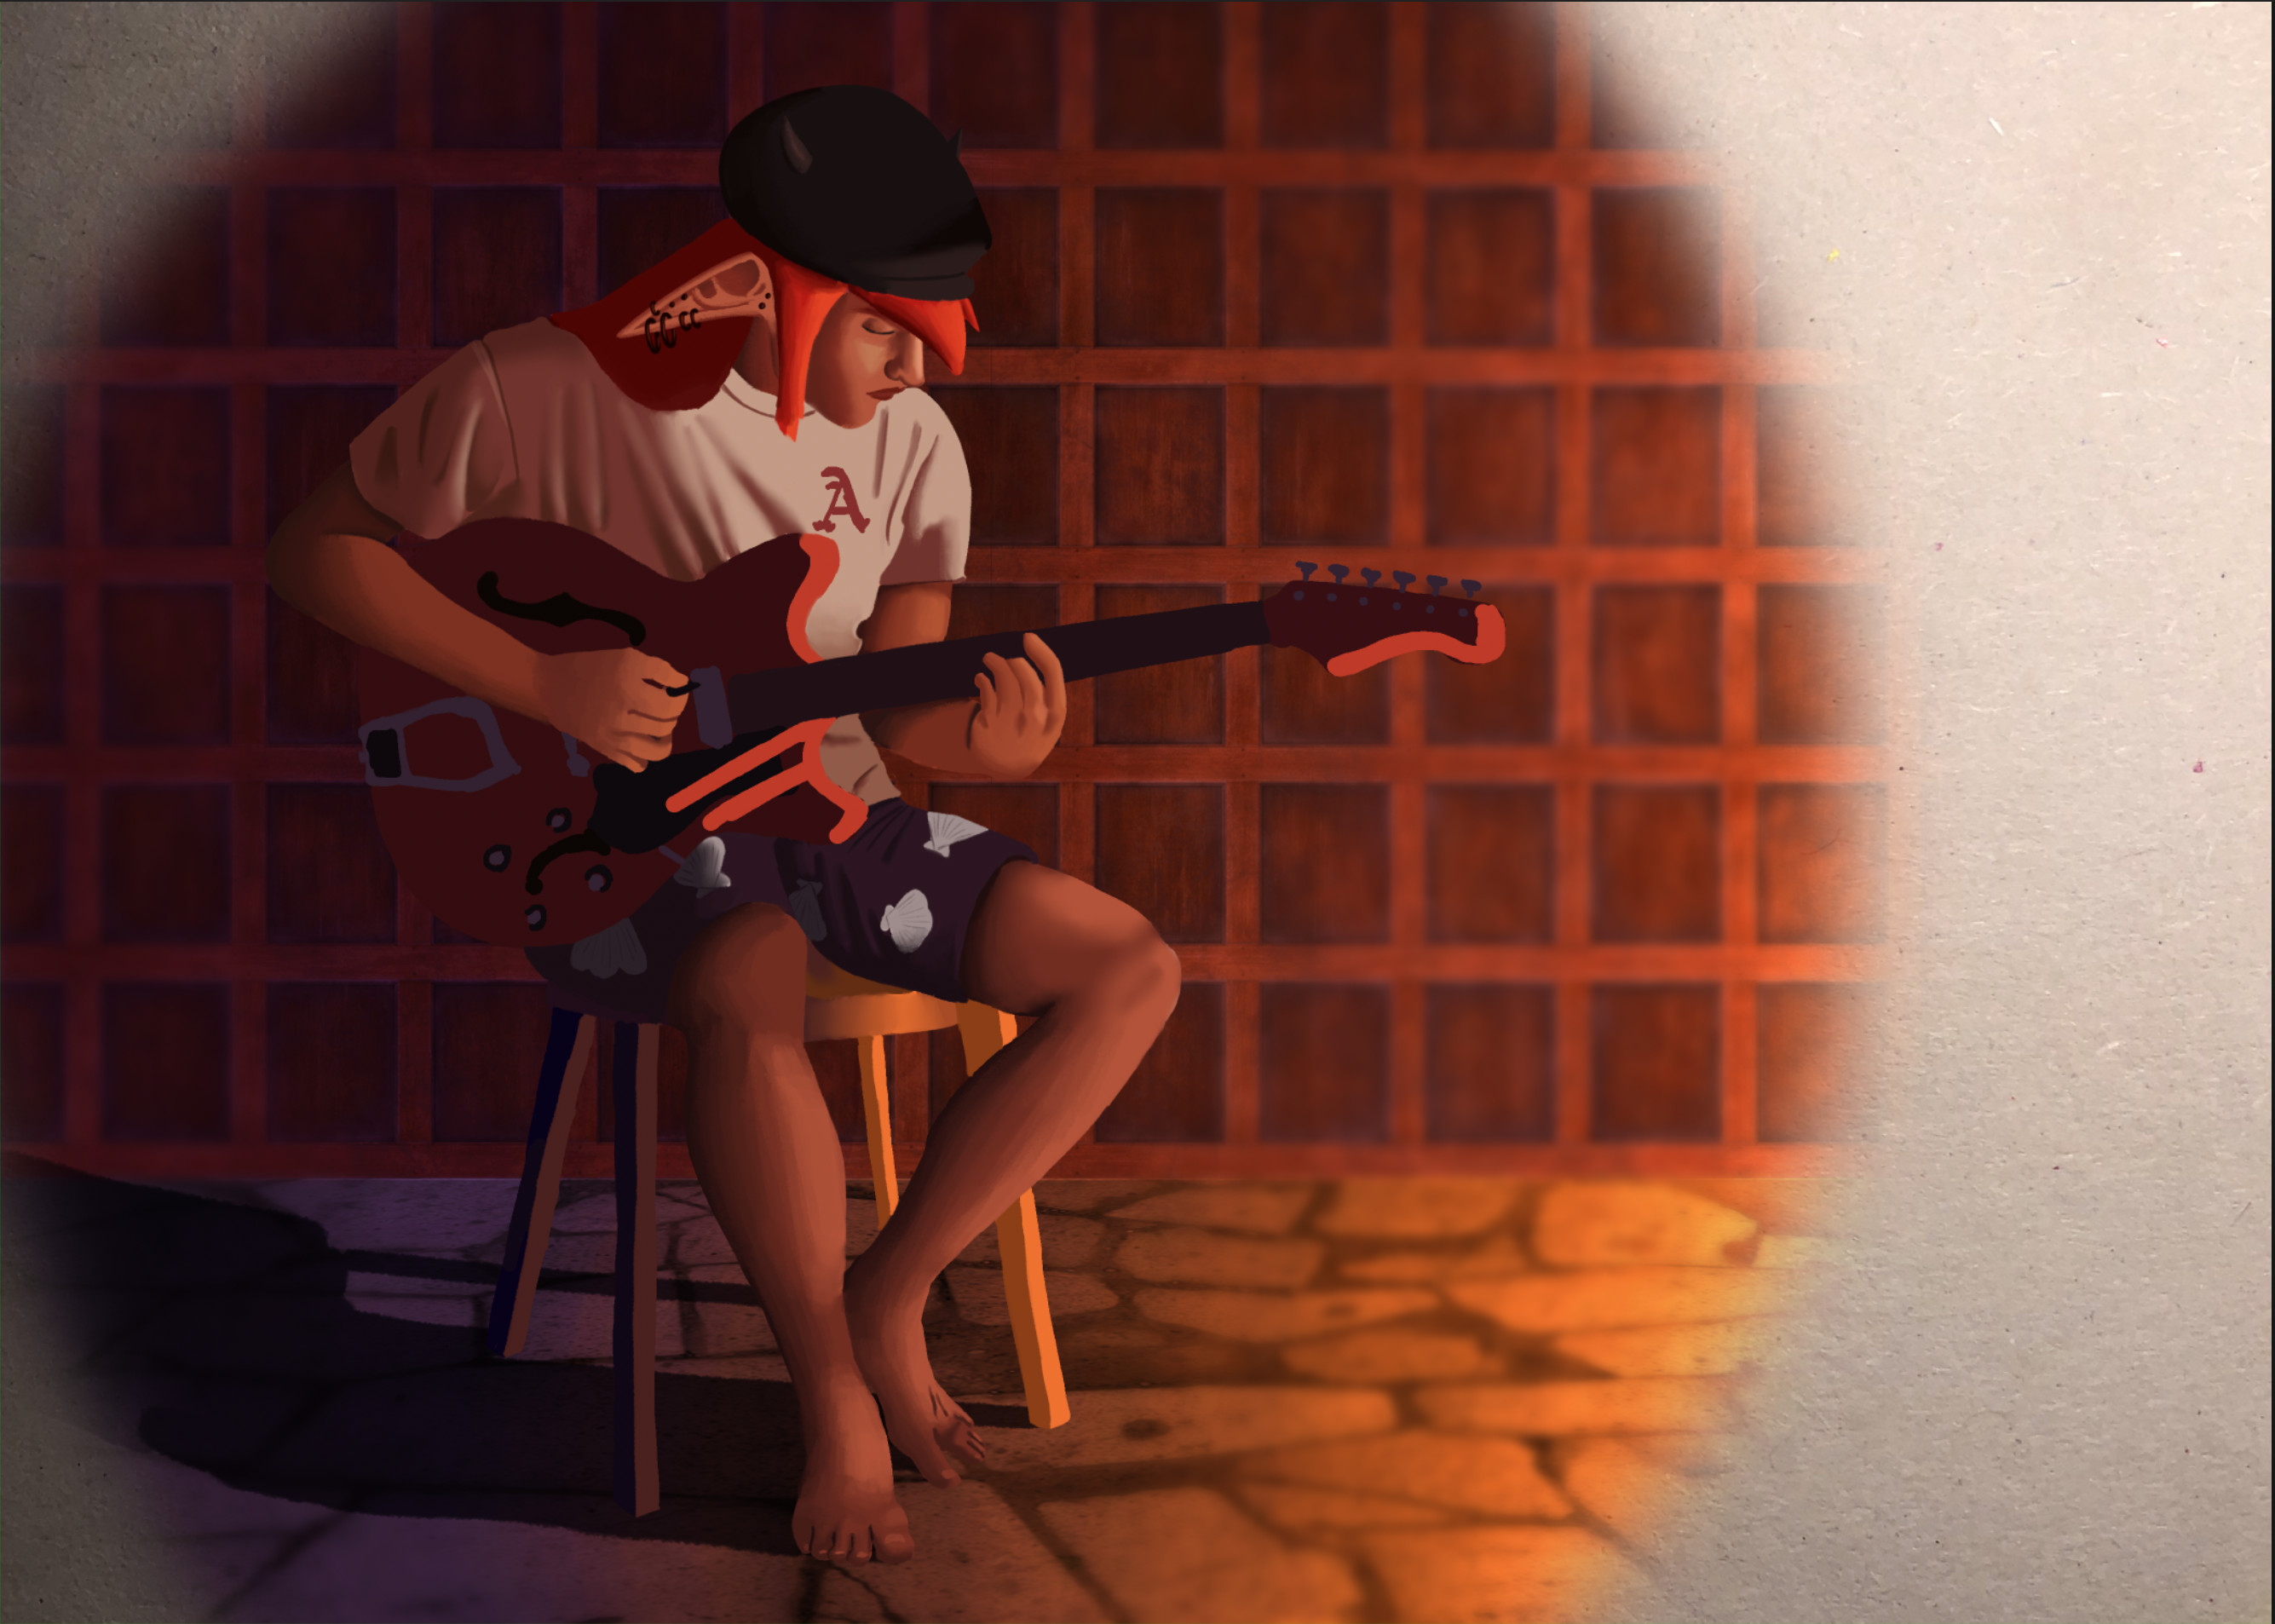 partially rendered, still needs hair and guitar rendered